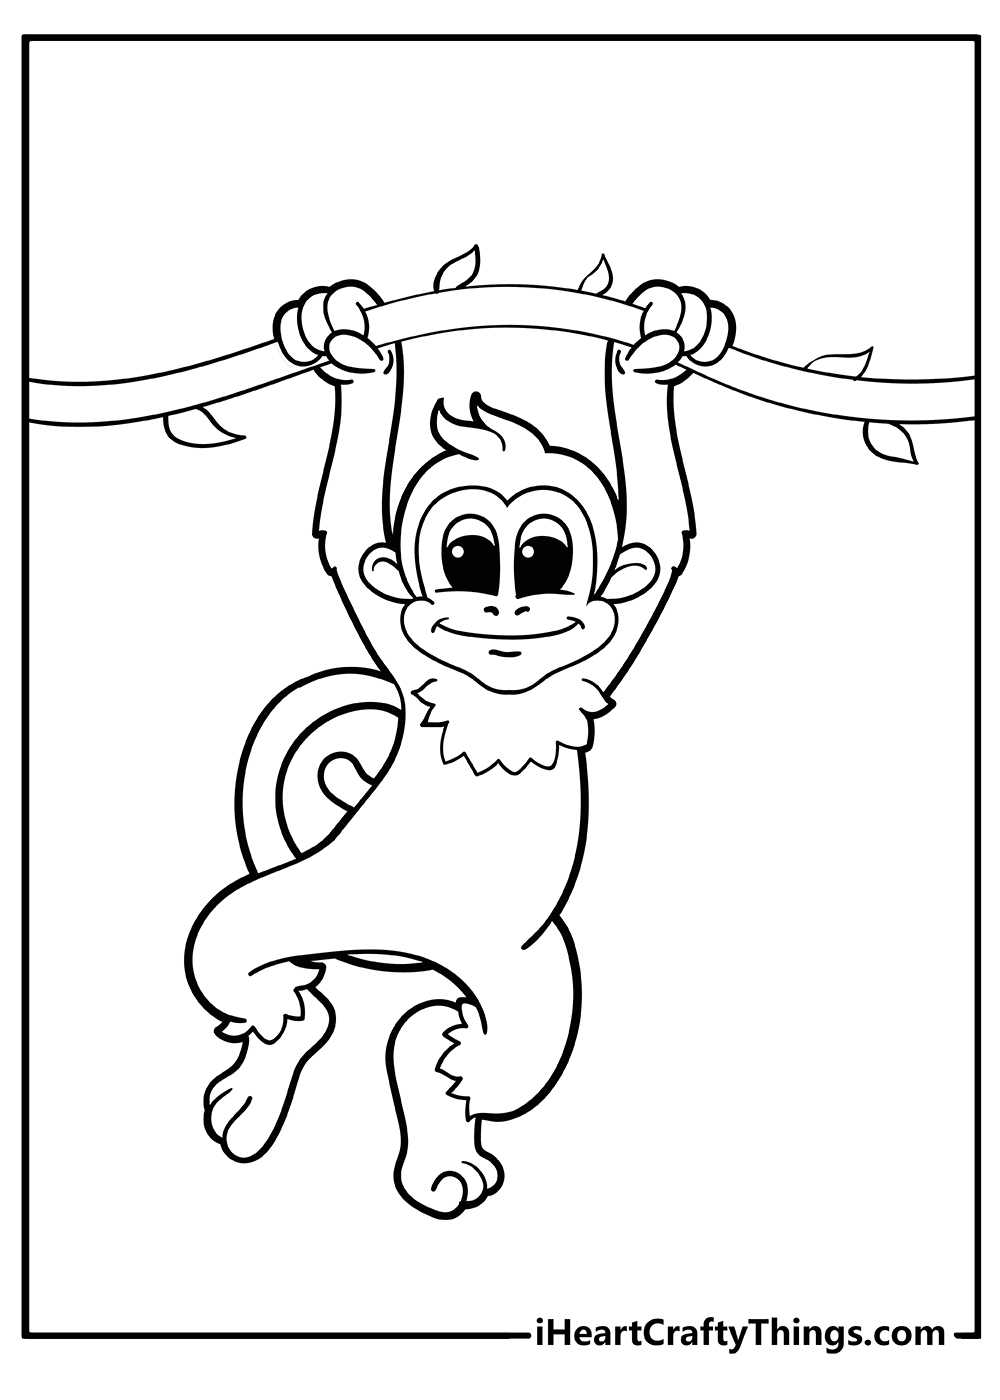 Monkey Easy Coloring Pages